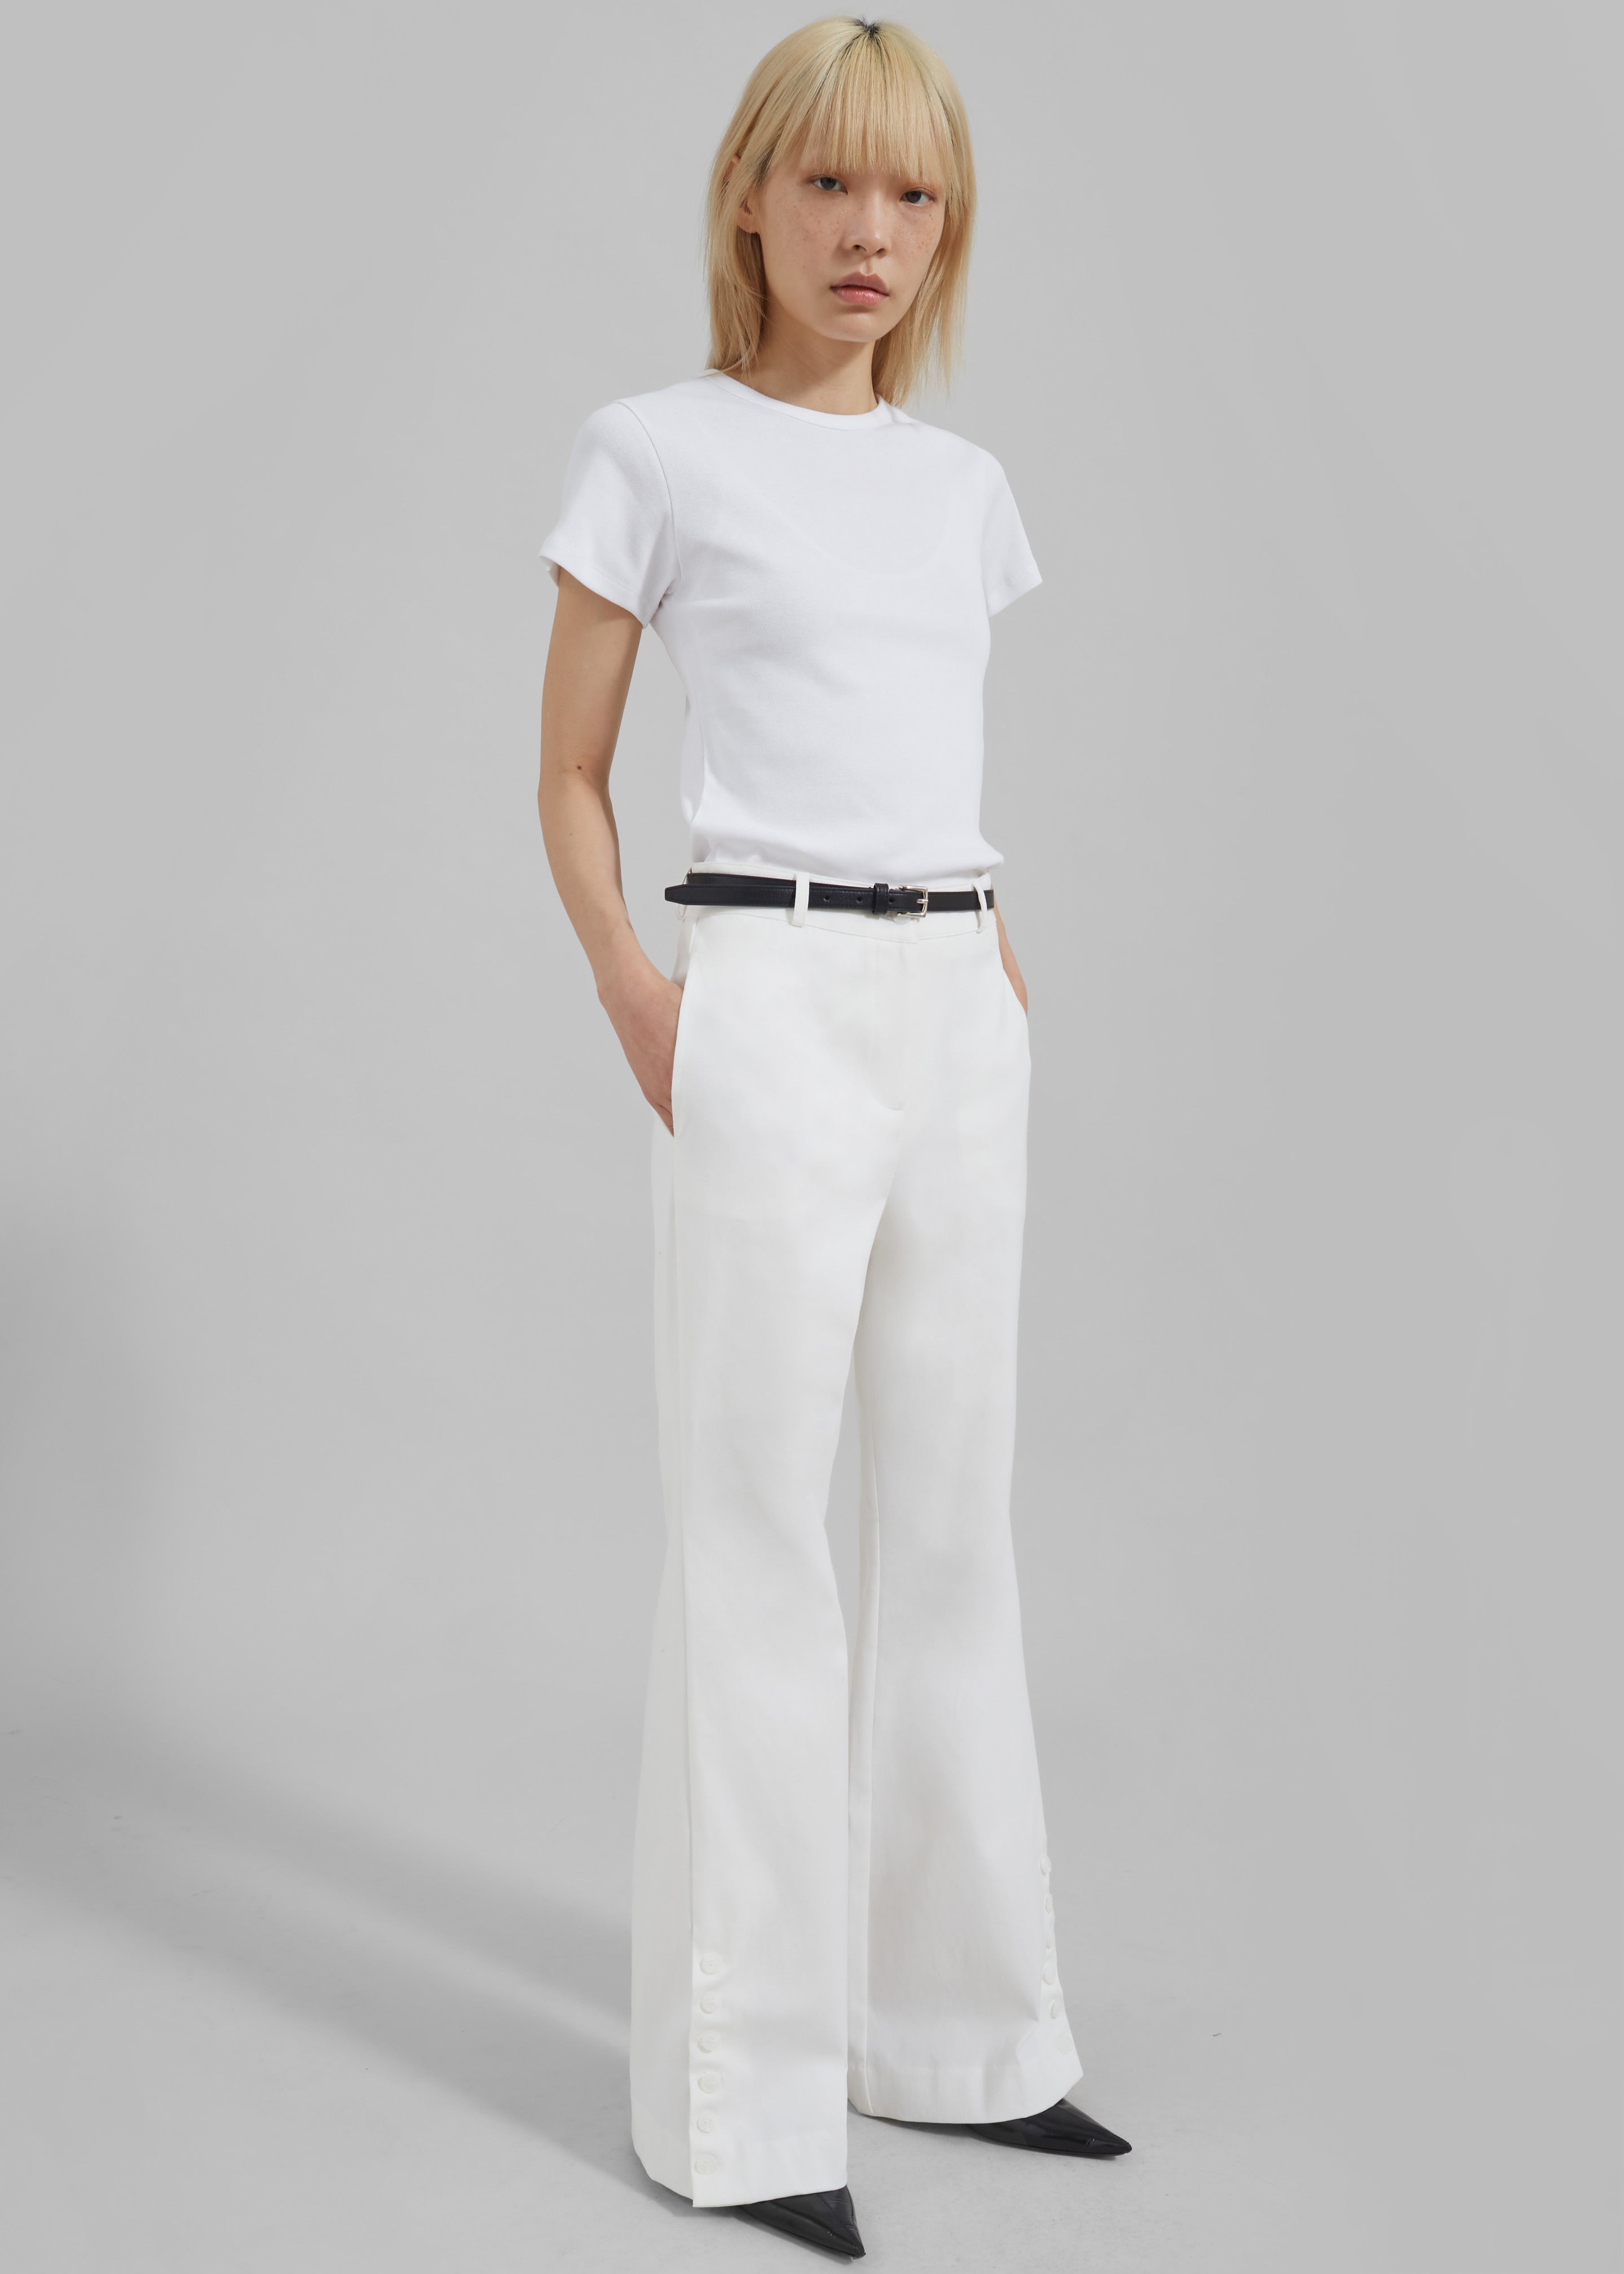 Michelle Flare Pants - Ivory - 7